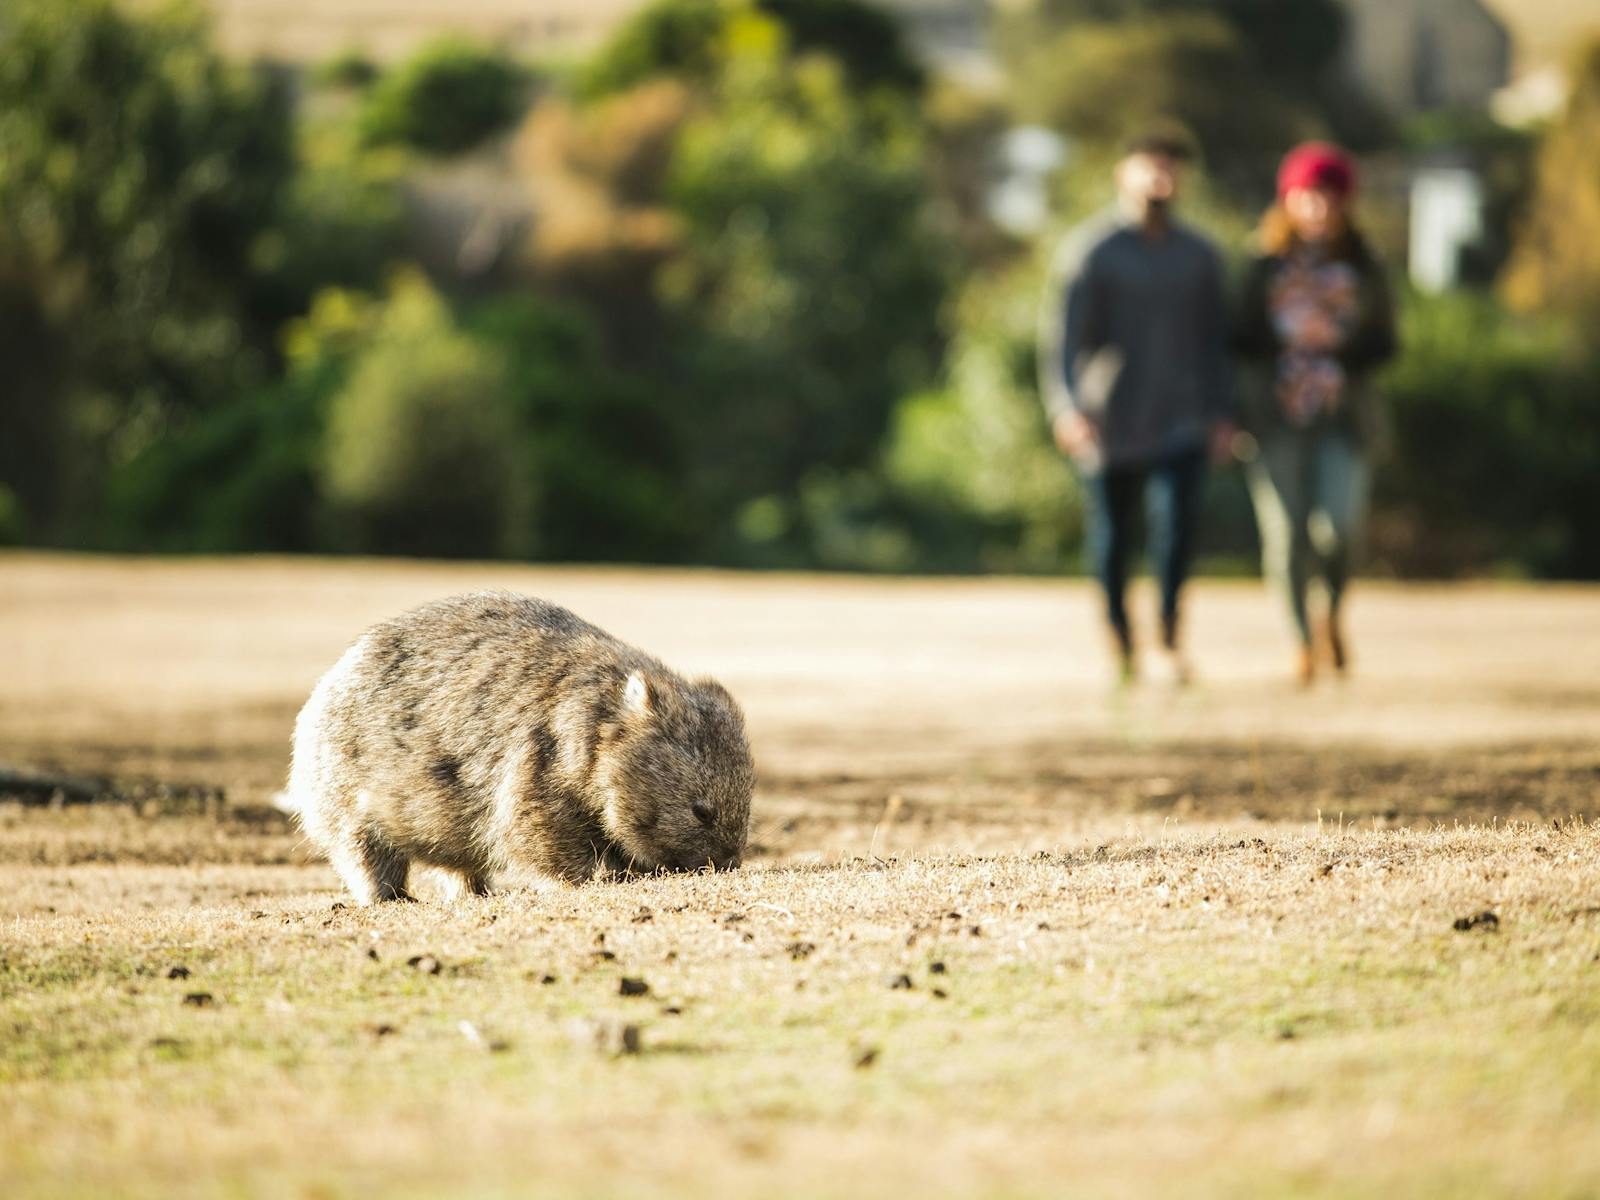 A wombat eating grass in foreground with two people viewing from the distance.